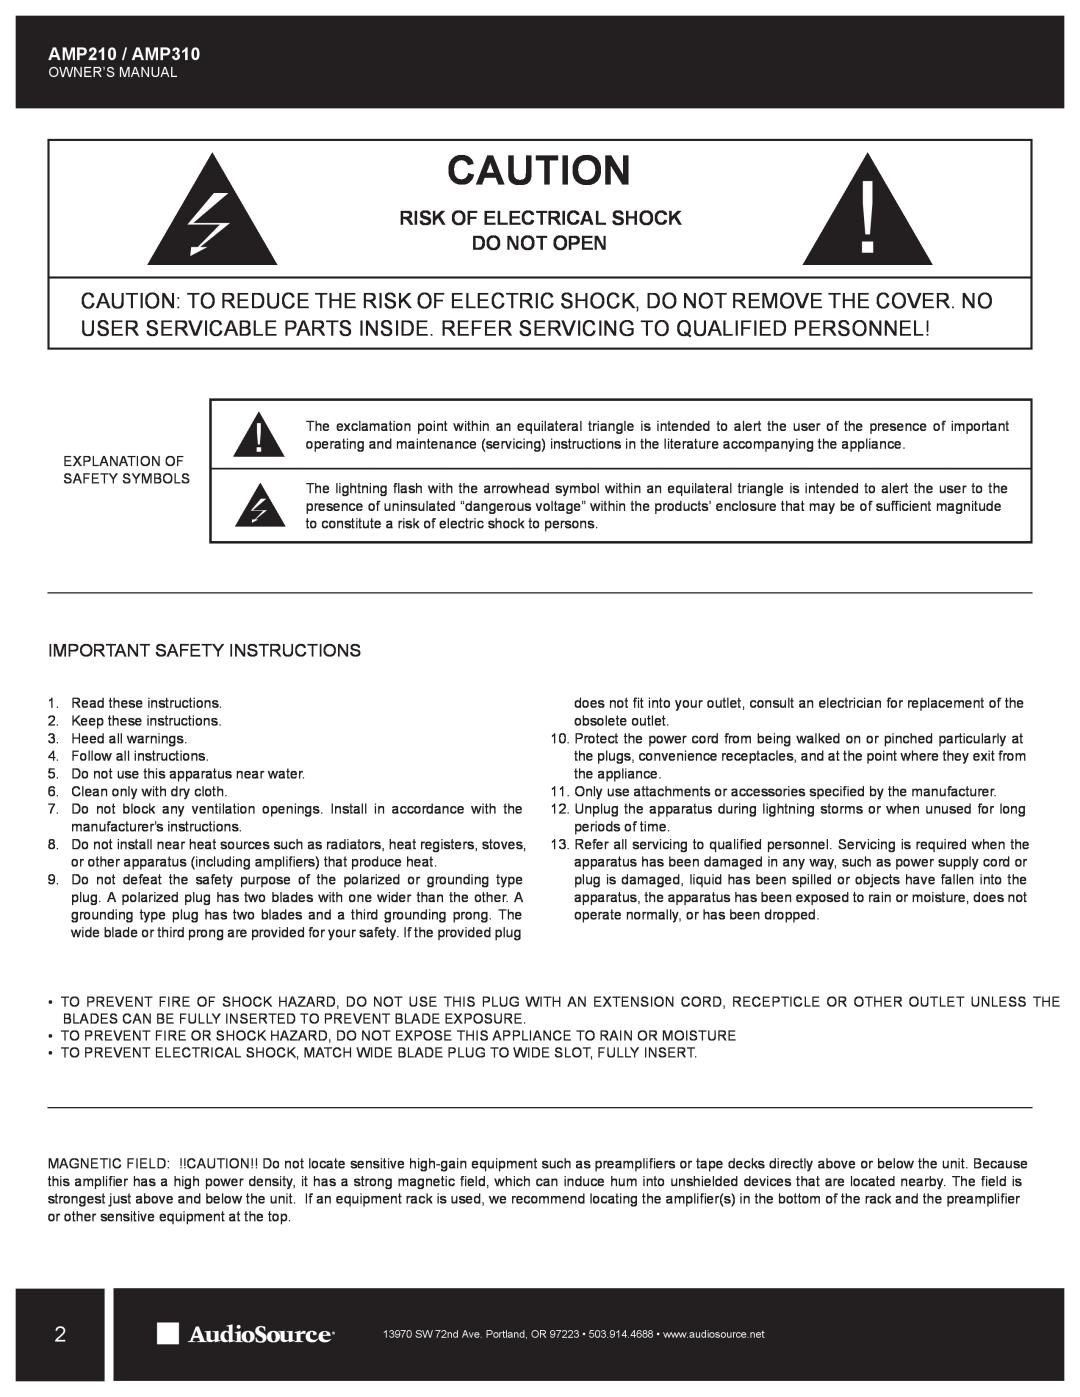 AudioSource owner manual AMP210 / AMP310, Important Safety Instructions, Risk Of Electrical Shock Do Not Open 